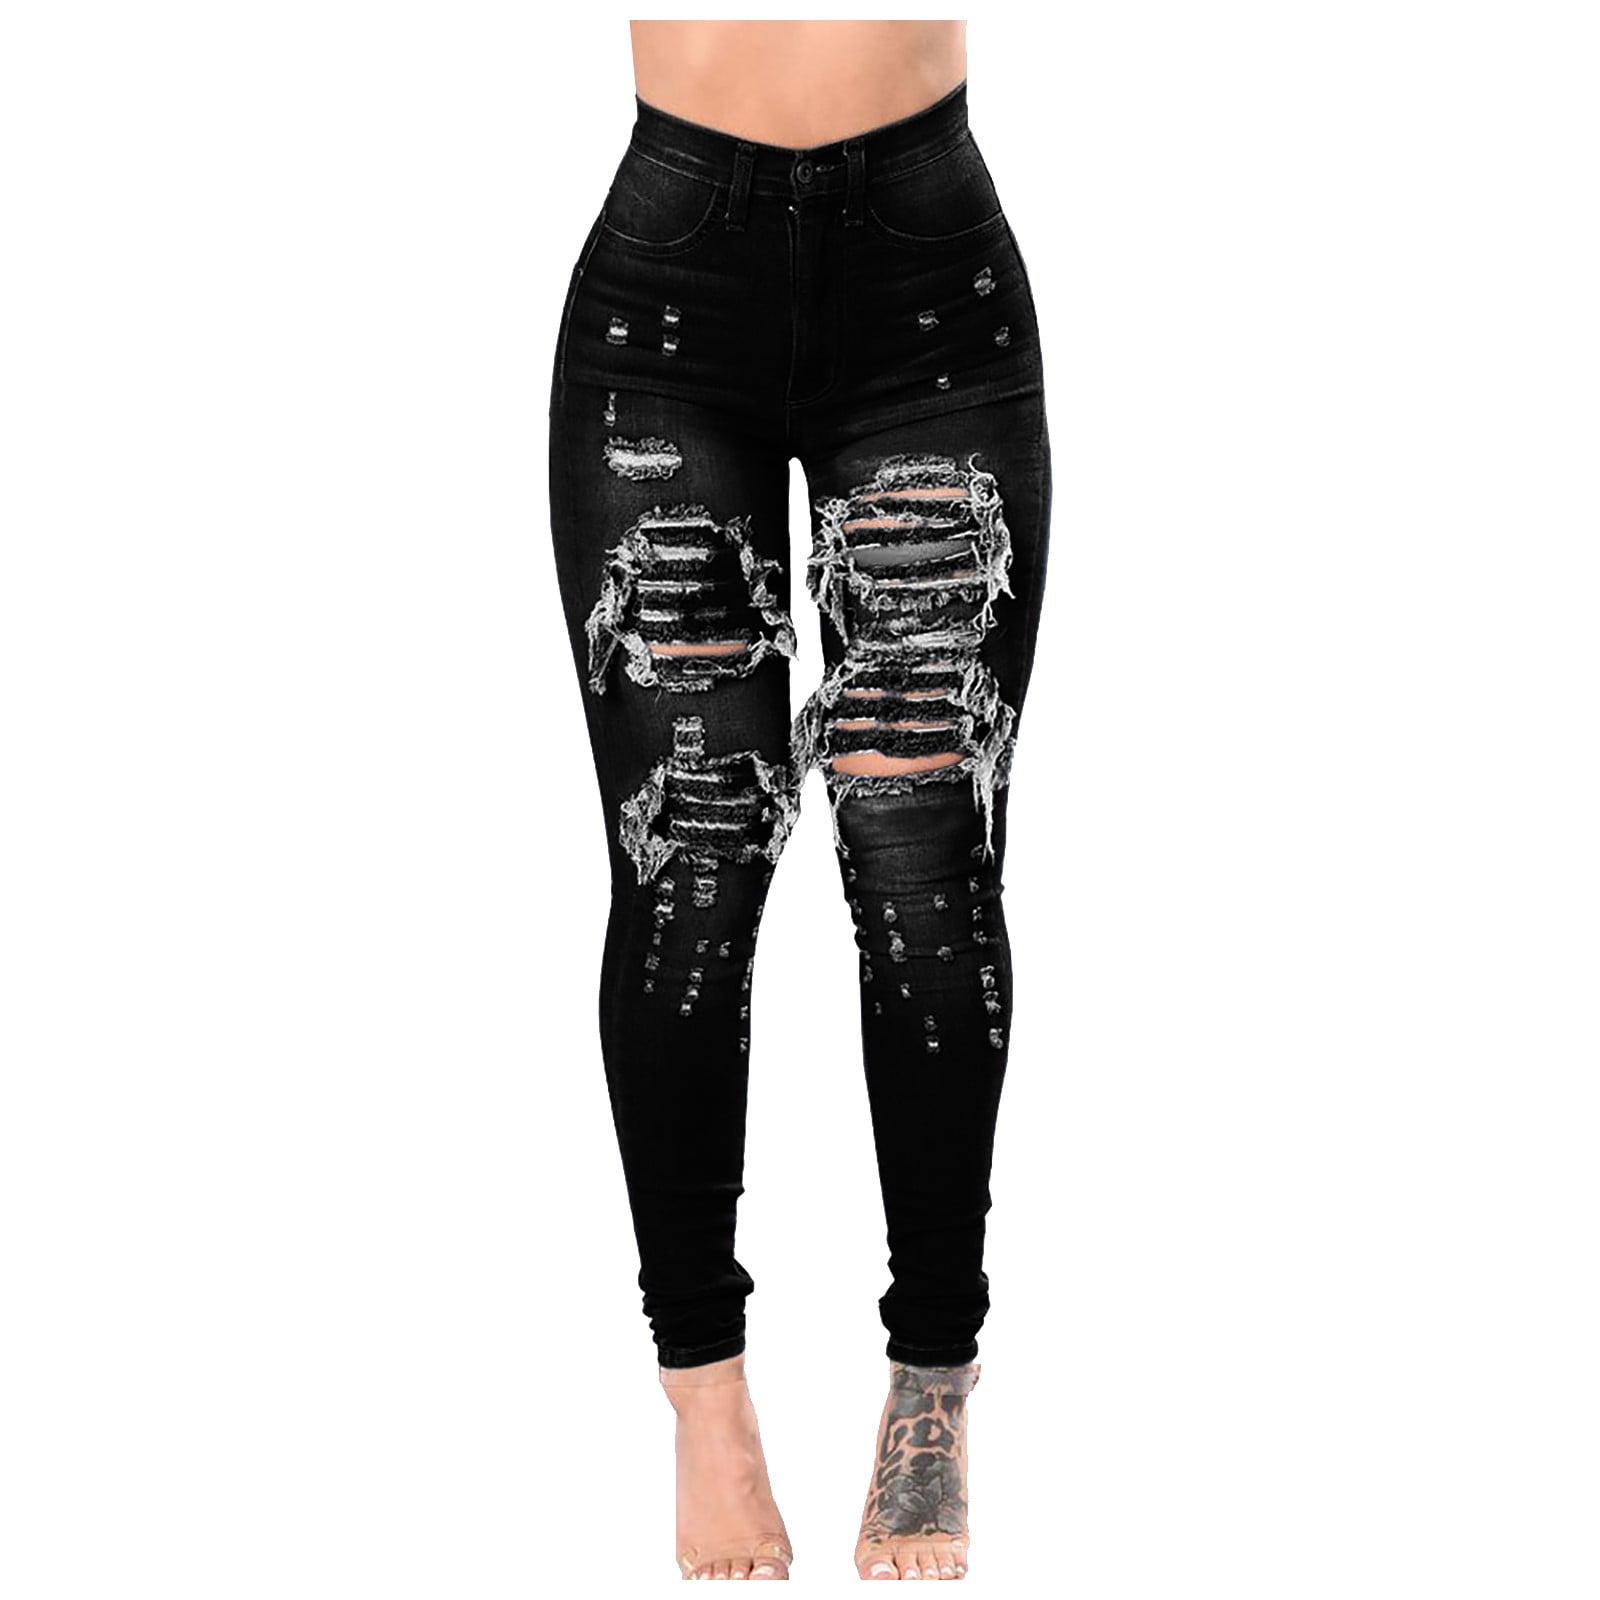 Womens Regular V2 4 Hole Ripped High Waisted Fitjeans - Arctic